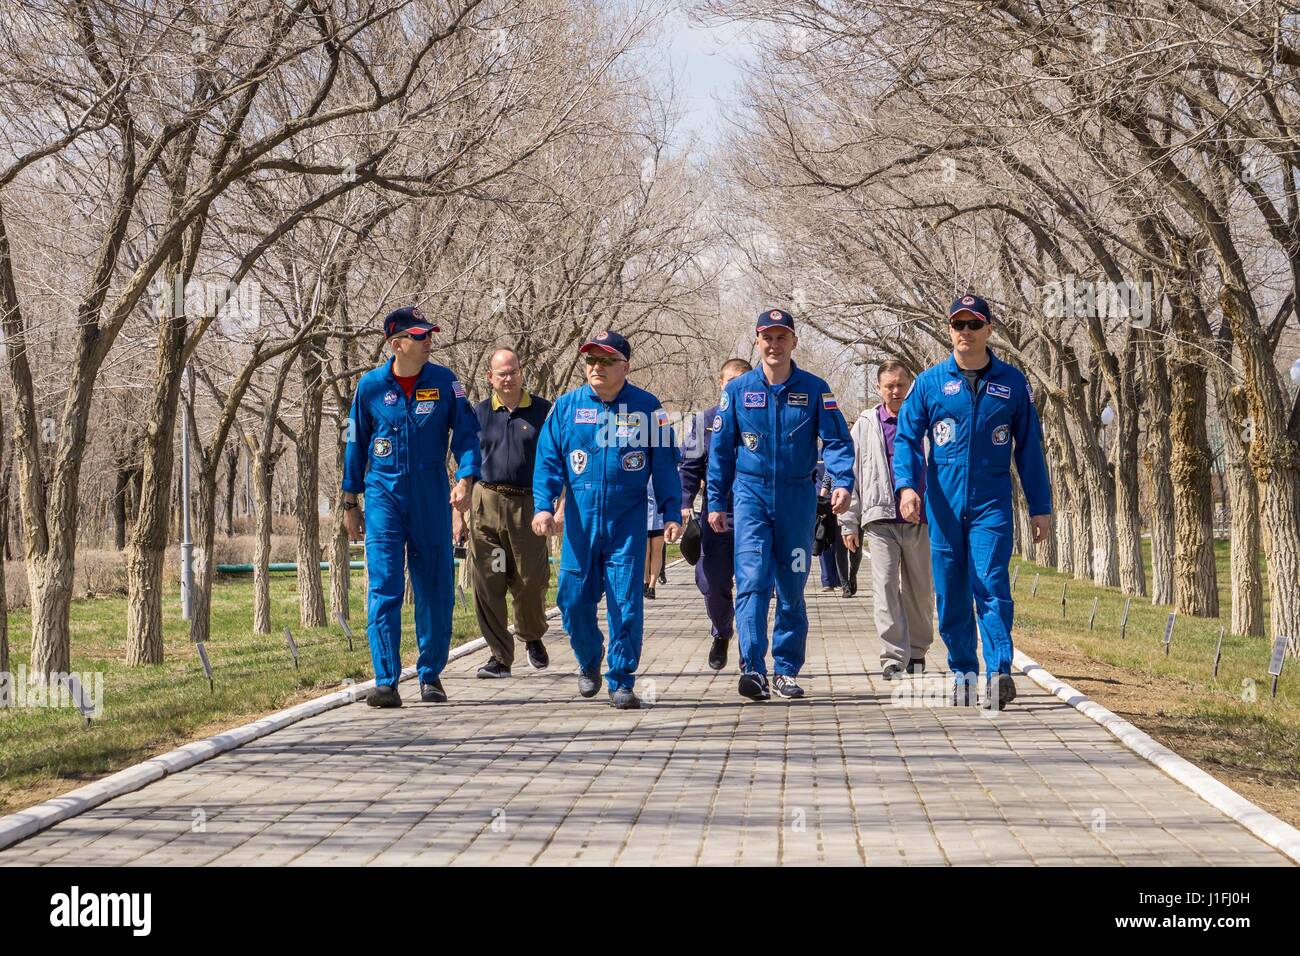 NASA International Space Station Expedition 51 Soyuz MS-04 mission prime and backup crew members (L-R) American astronaut Randy Bresnik, Russian cosmonauts Fyodor Yurchikhin and Sergey Ryazanskiy of Roscosmos, and American astronaut Jack Fischer stroll down the Cosmonaut Hotel Walk of Cosmonauts during pre-launch activities April 13, 2017 in Baikonur, Kazakhstan.      (photo by Victor Zelentsov /NASA   via Planetpix) Stock Photo